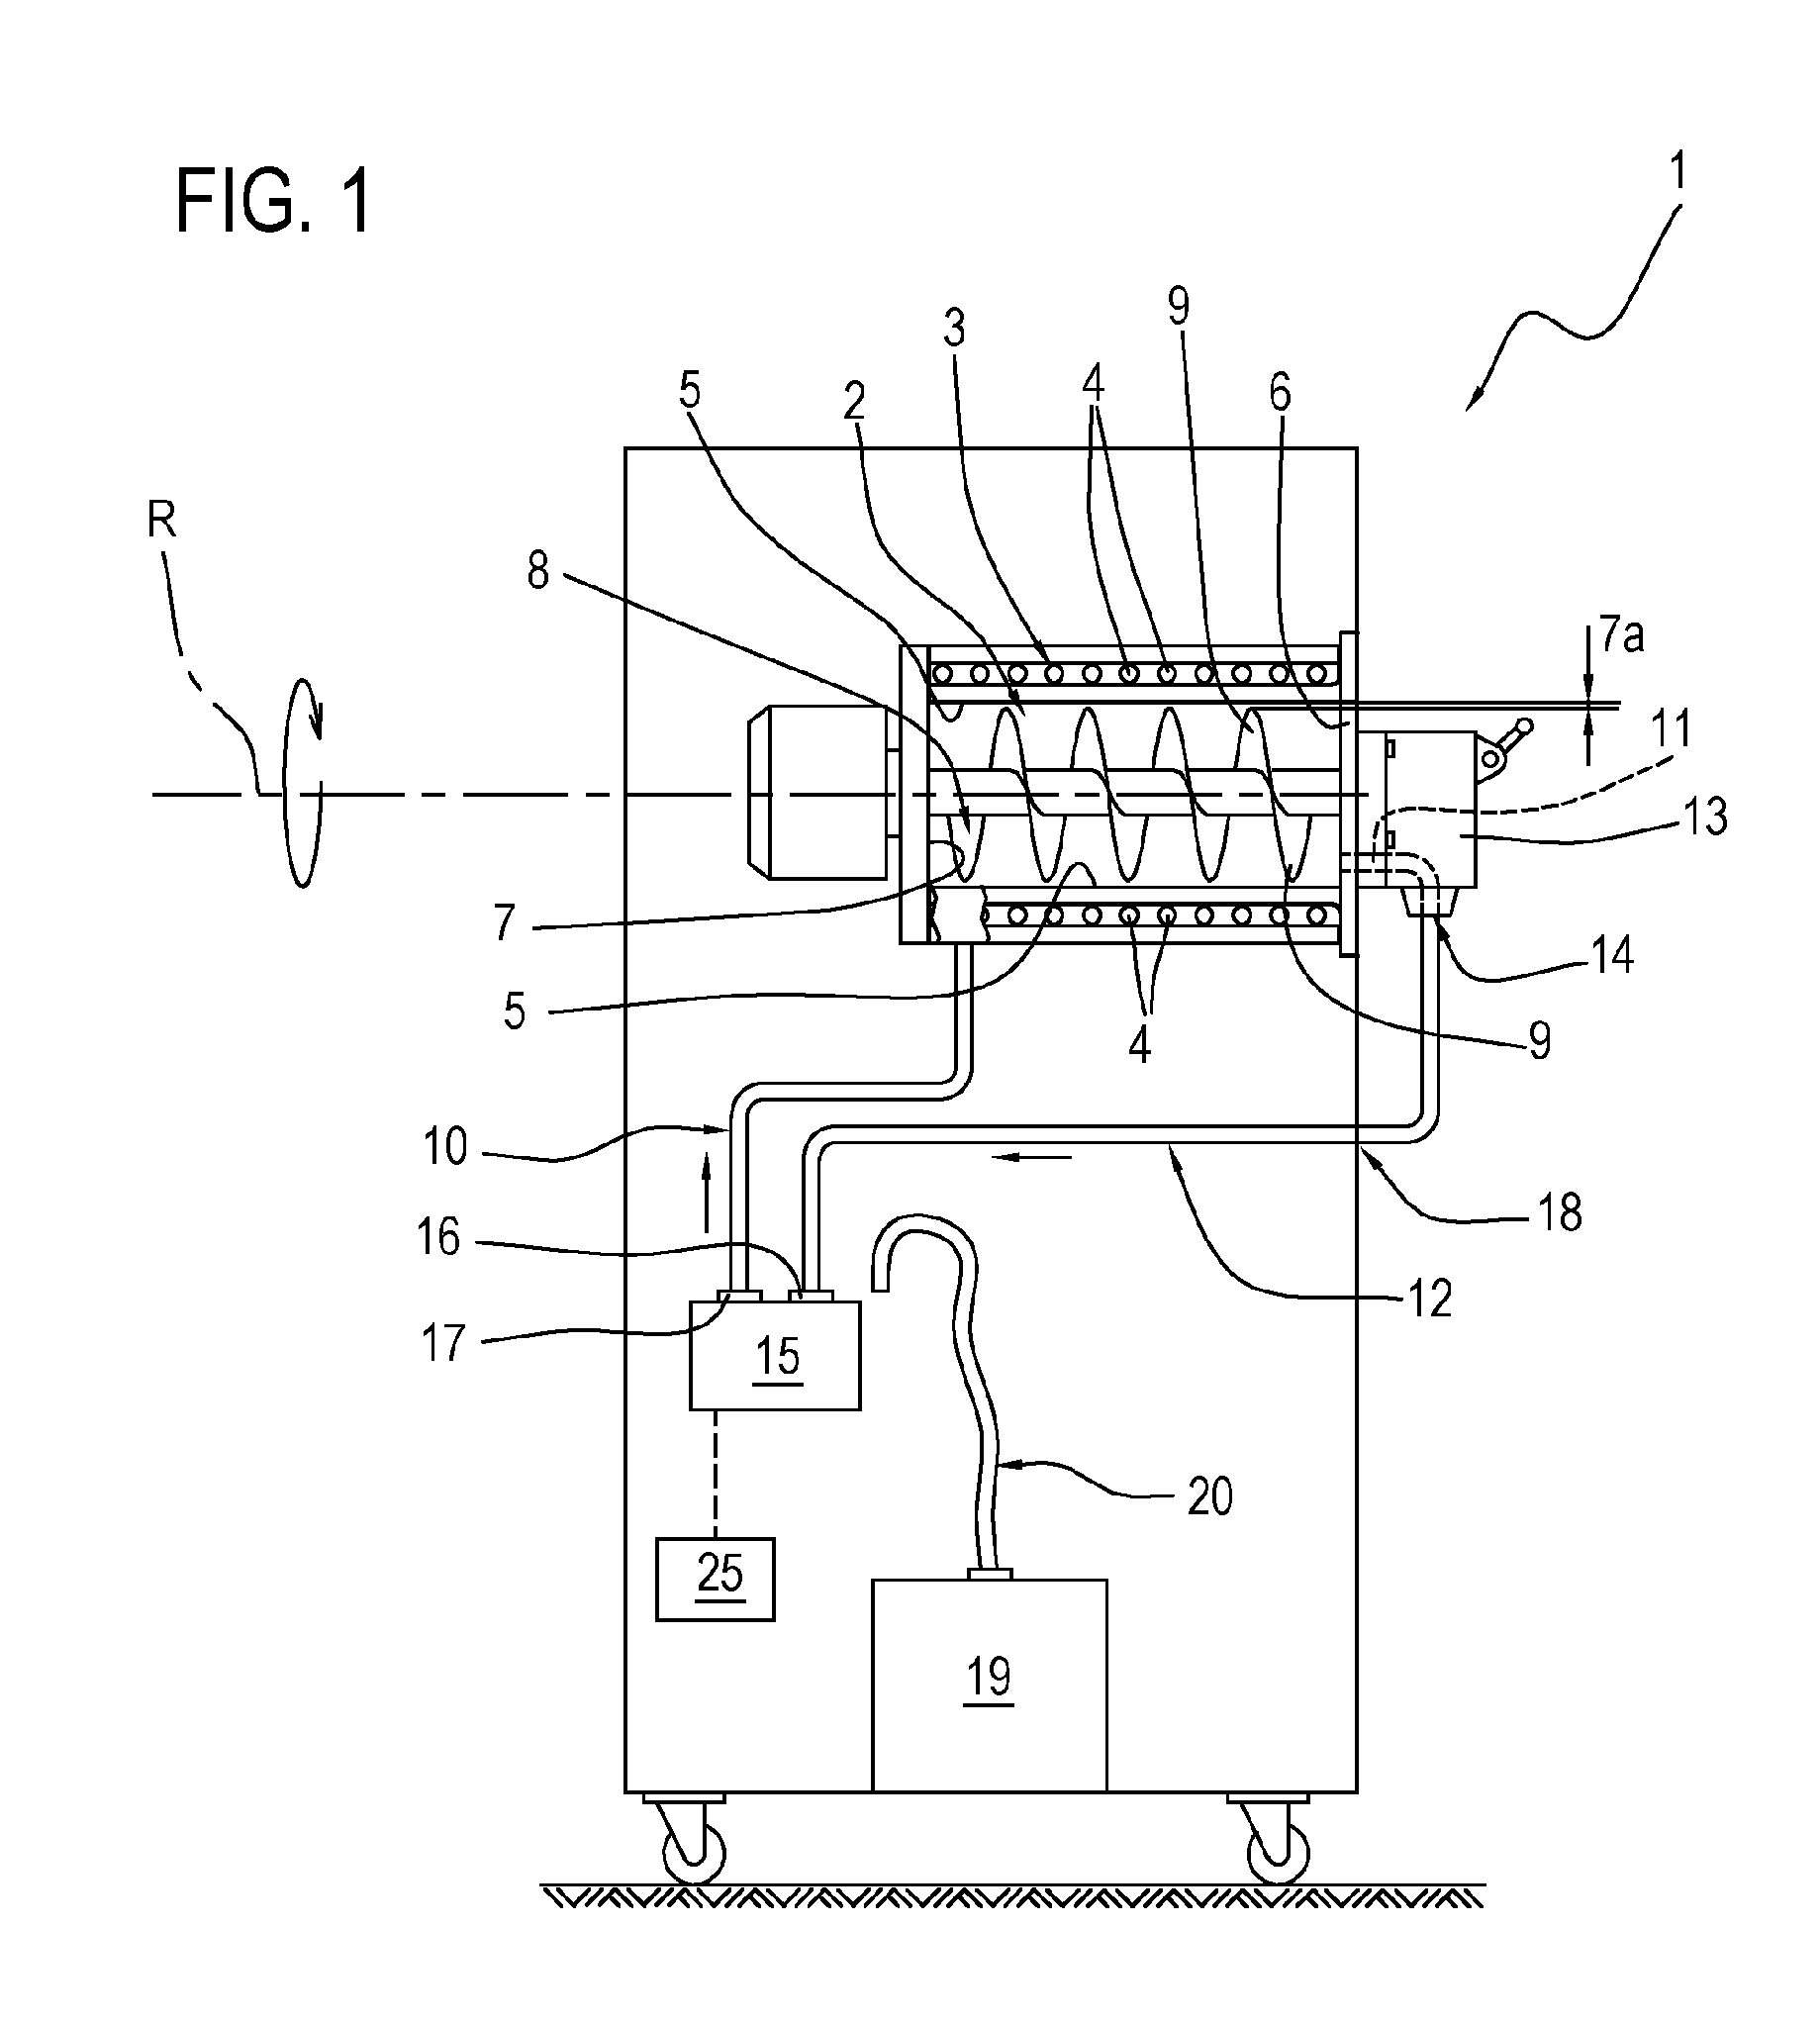 Machine and method for making and dispensing liquid, semi-liquid and/or semi-solid food products